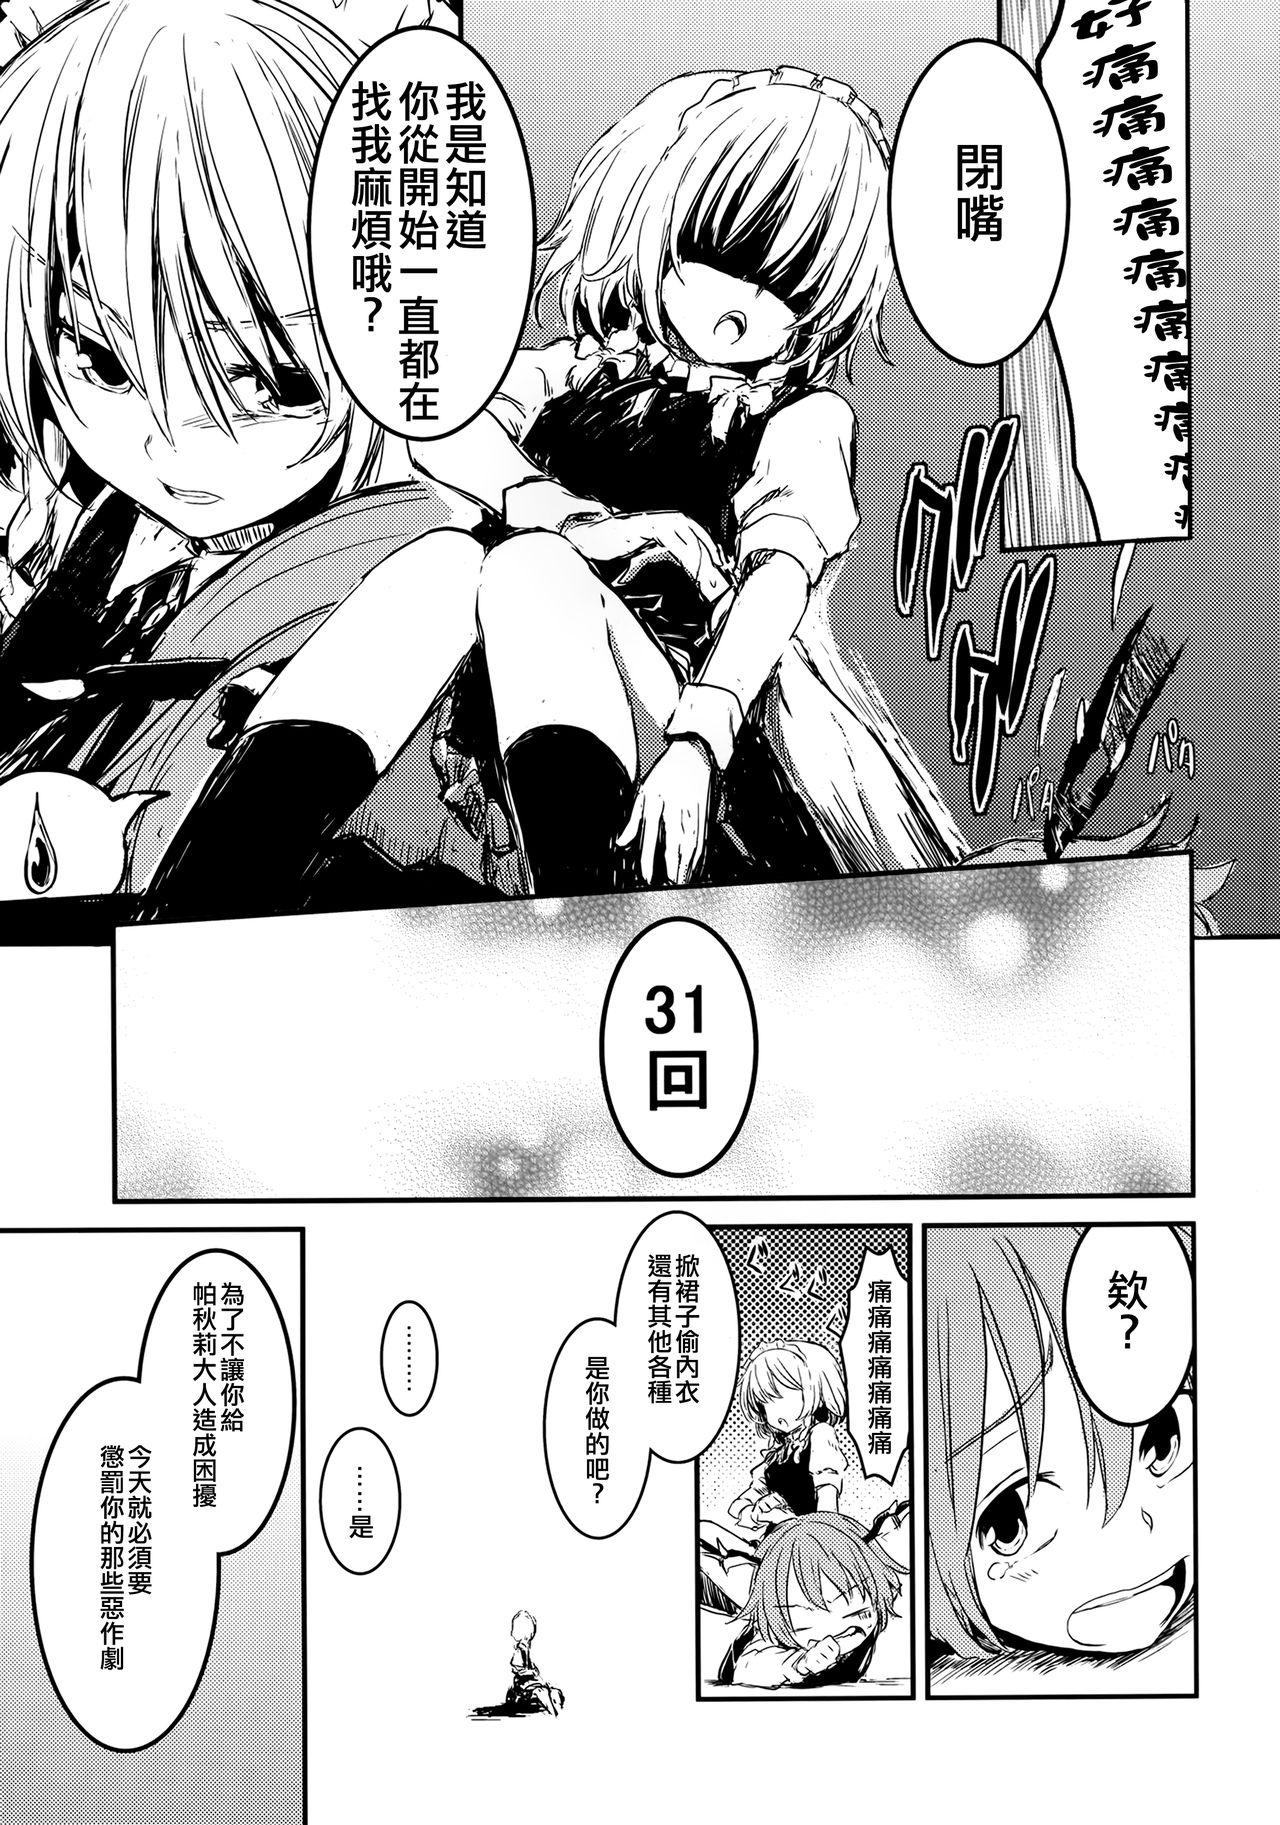 Couch Fushigi na Maid to Library - Touhou project Hung - Page 7